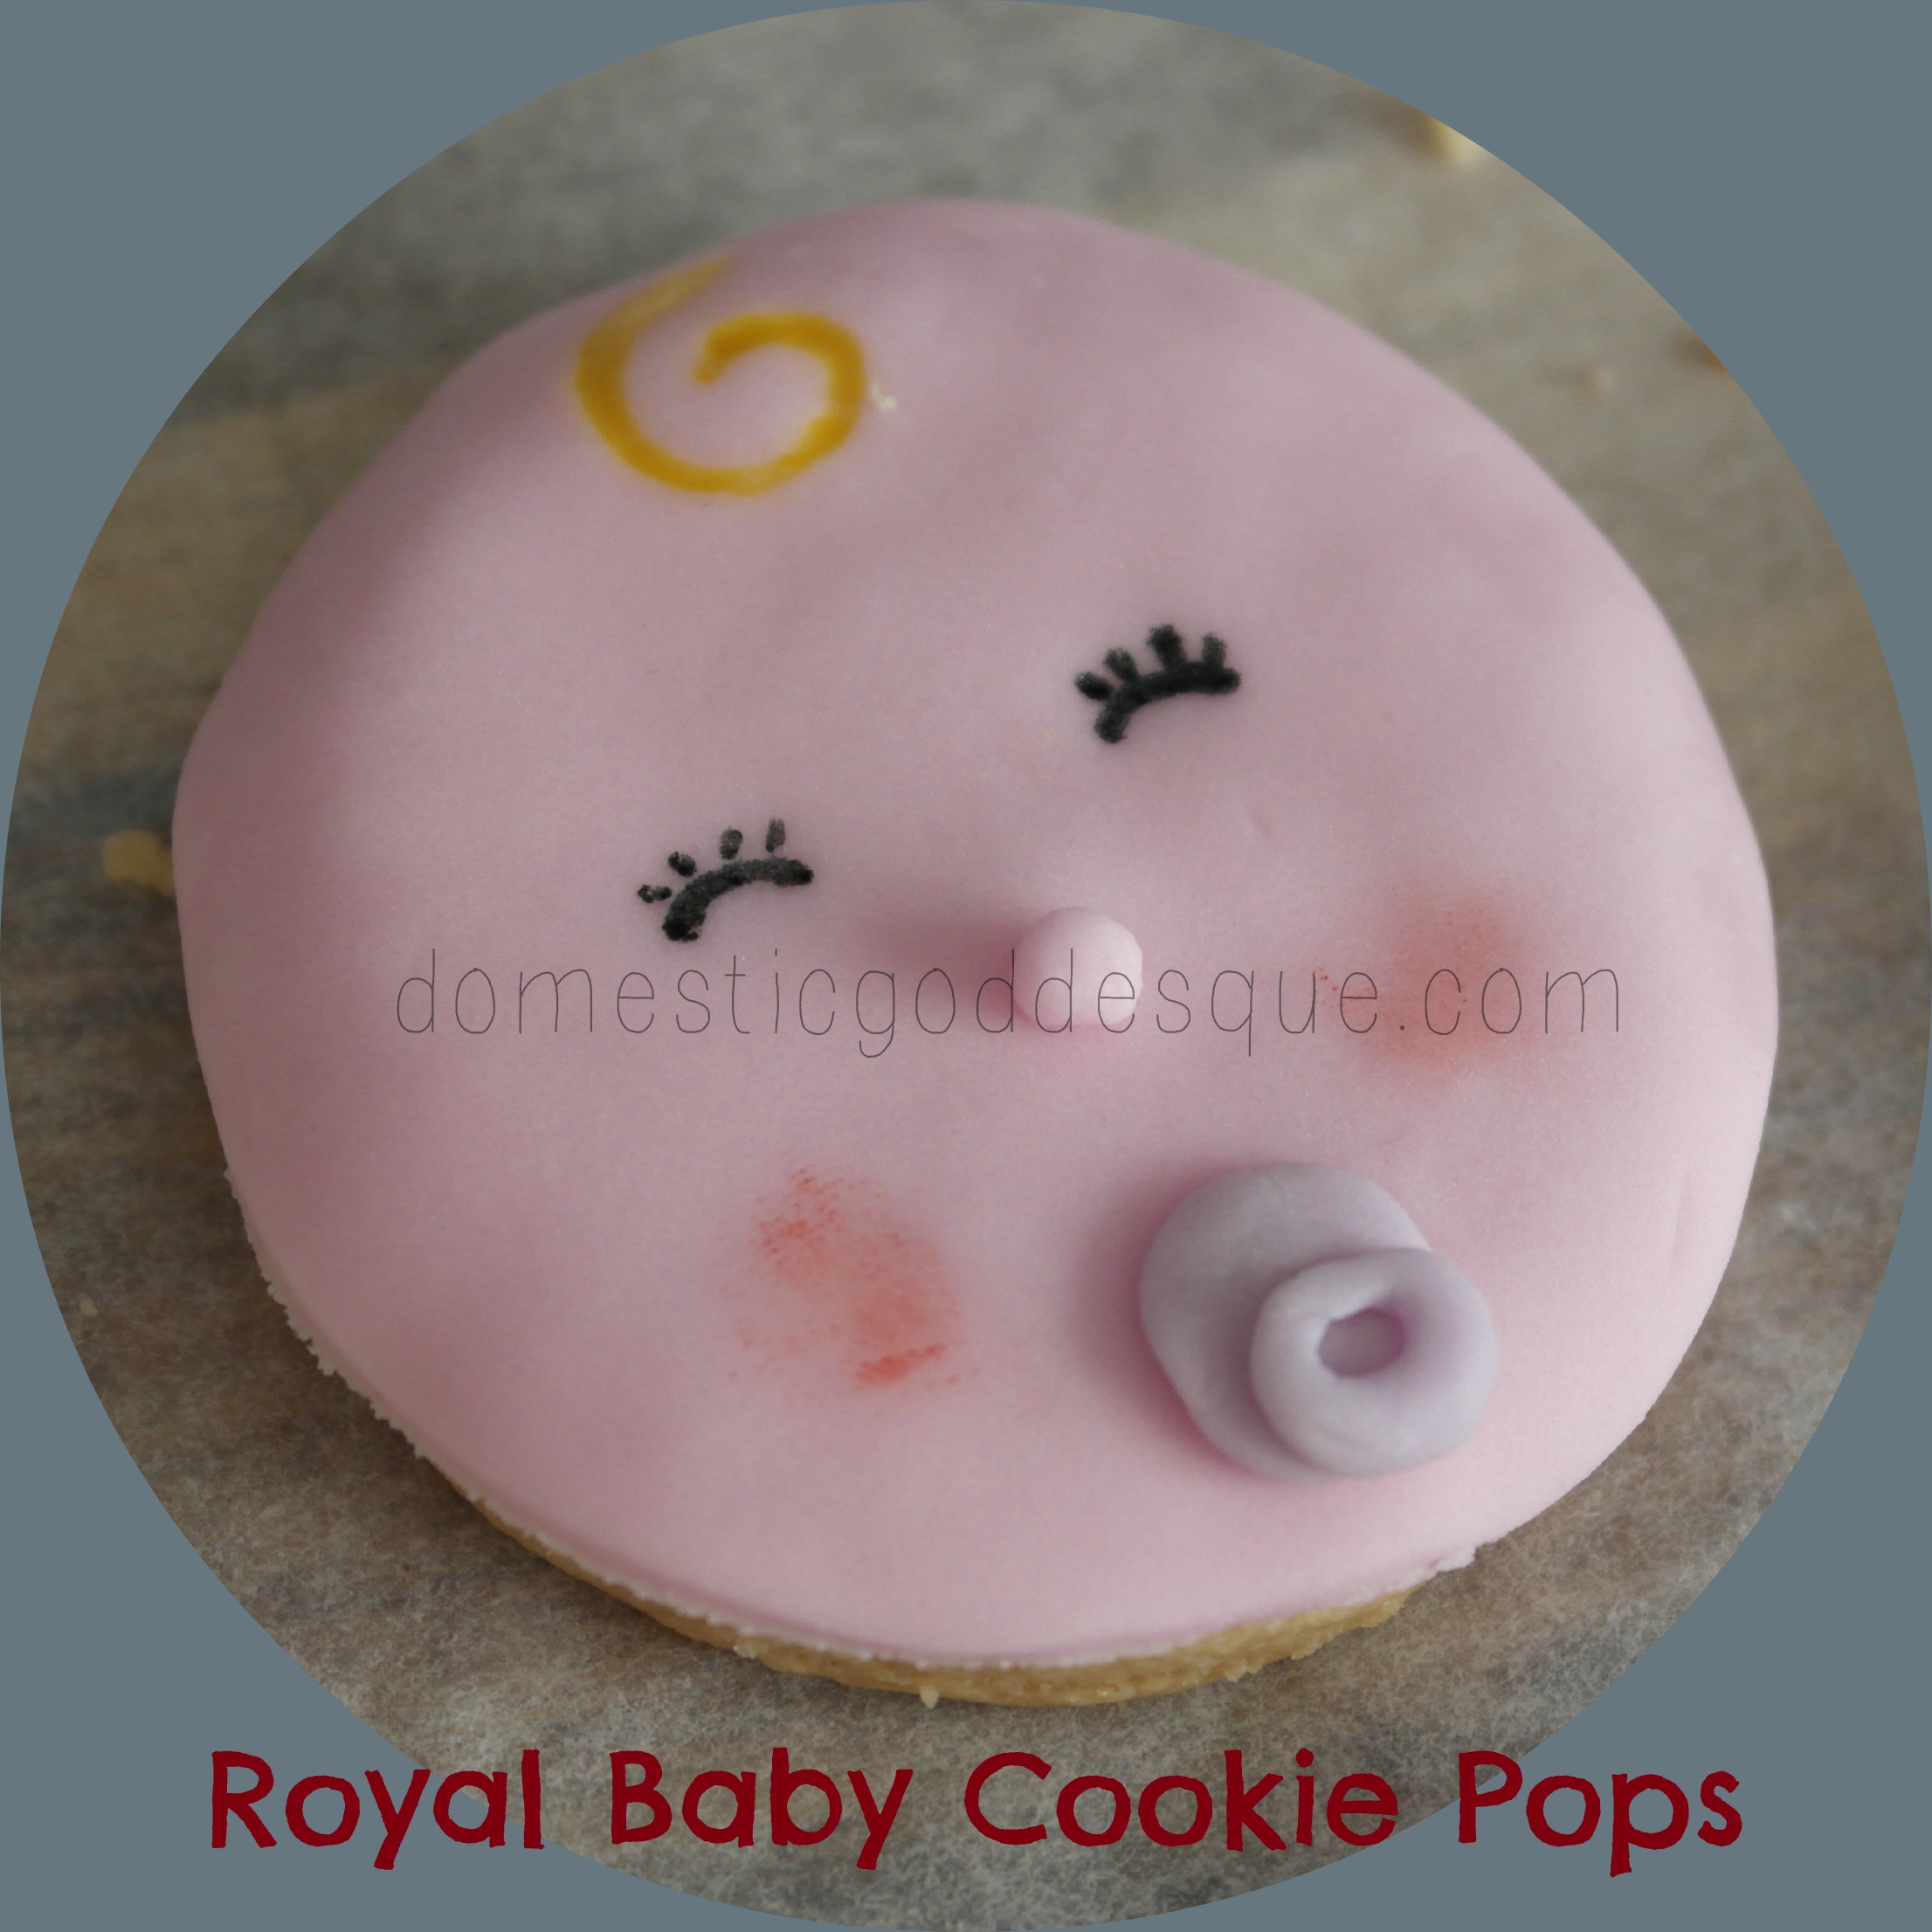 How to make Royal Baby Cookie Pops